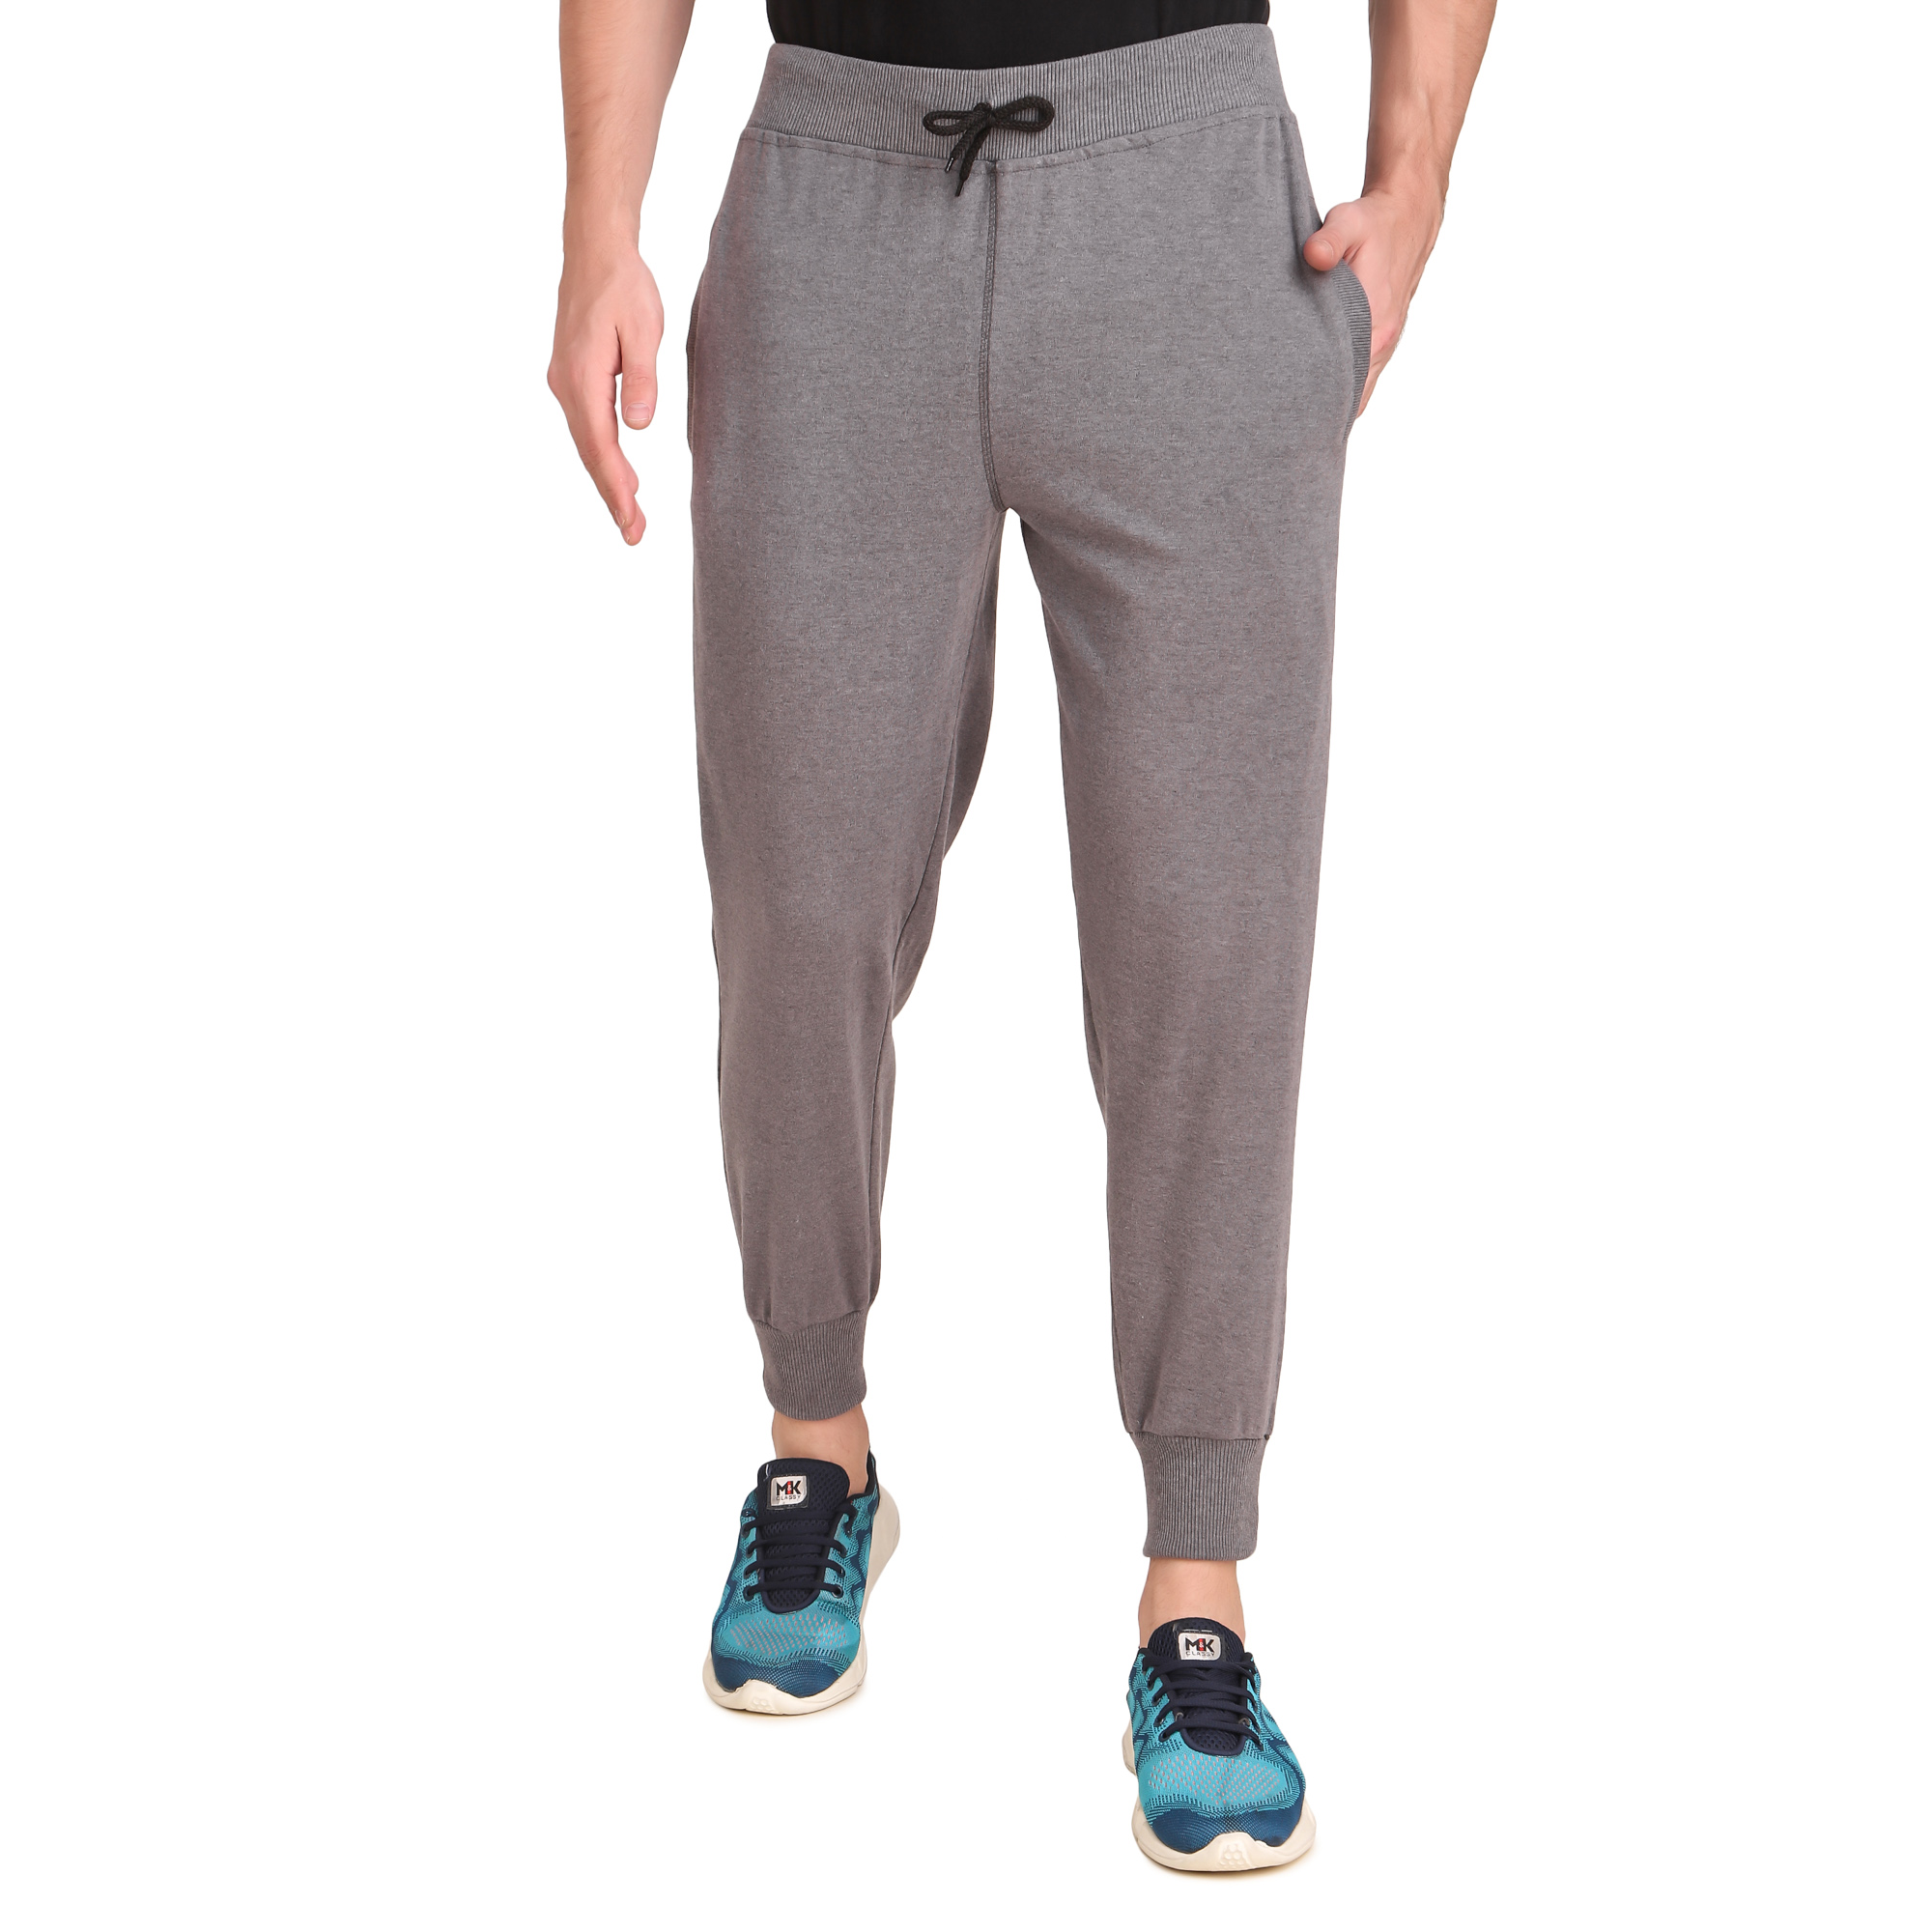 Cotton Joggers for Men's (Grey)